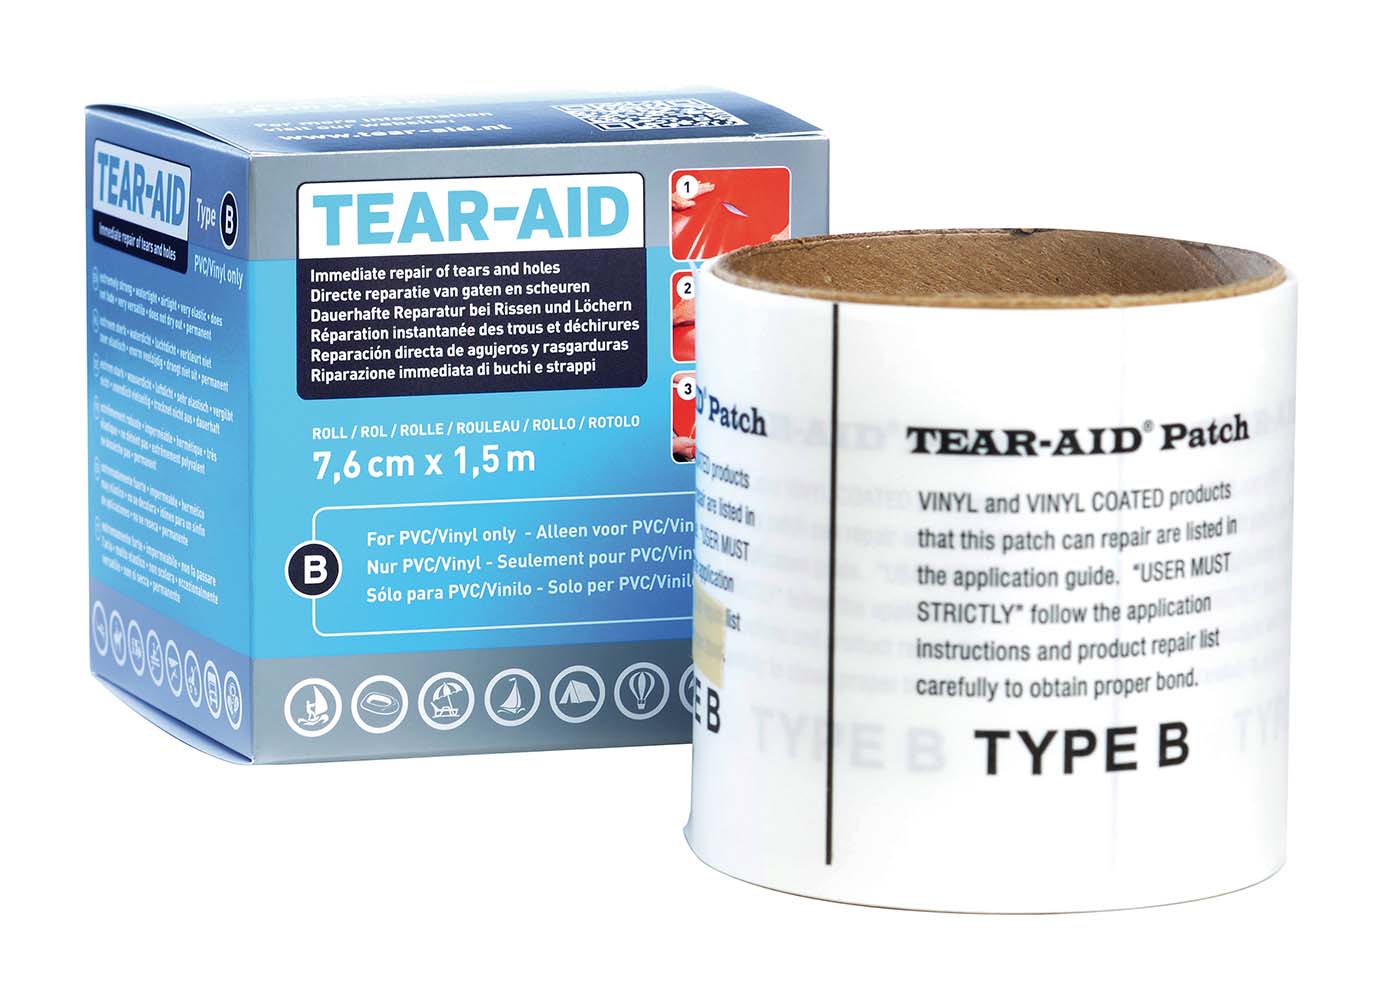 5714003 "A multi-functional and transparent repair agent. Tear-Aid B permanently repairs holes and tears in PVC and vinyl. The repair agent is extremely strong, water and airtight, very elastic, it doesn't change colour and it doesn't dry out. Can even be used under water! Ideal for permanent repairs of PVC tent frames, PVC ground sheets, (inflatable) boats, swimming pools, inflatable toys, PVC sunscreens and umbrellas, vinyl raincoats and bags. The repair set contains a roll of Tear-Aid repair tape (150x7,6 cm)."